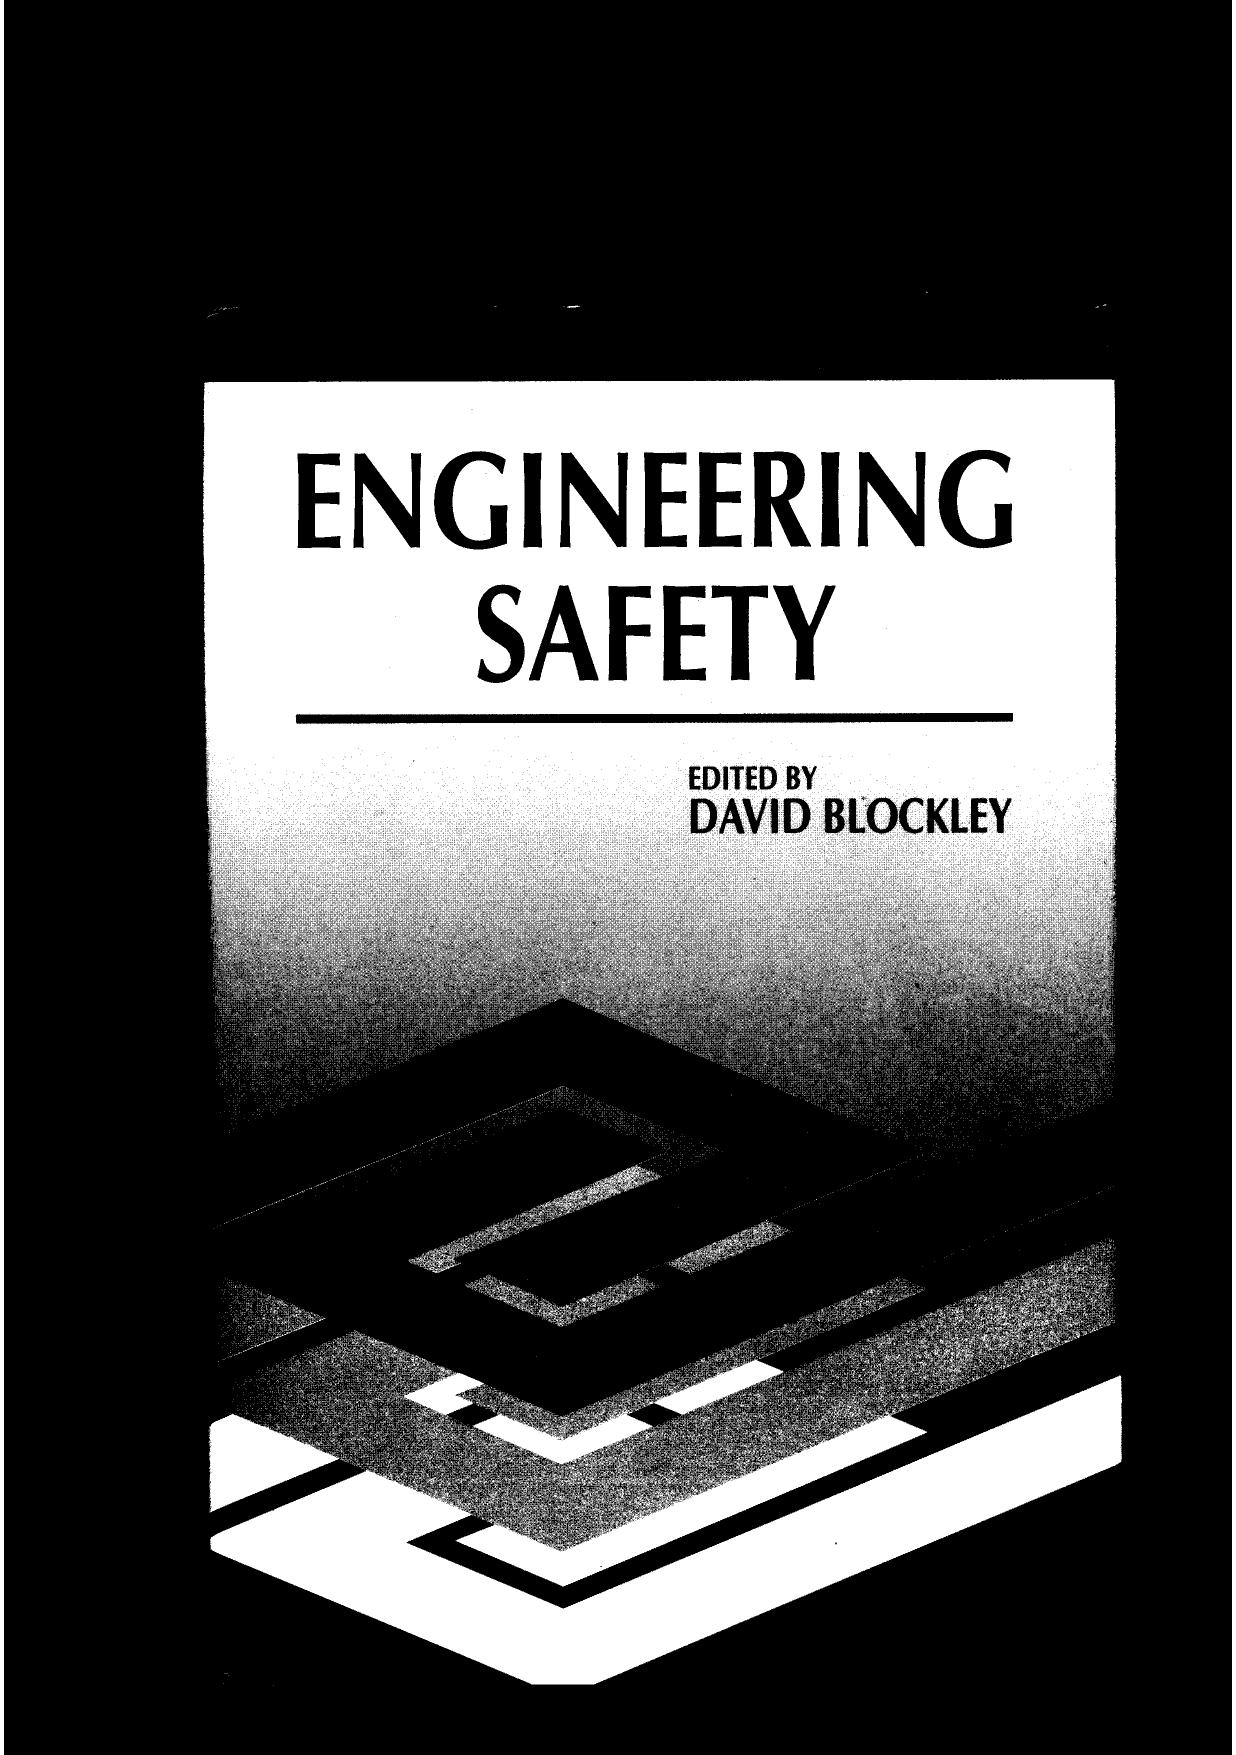 Engineering Safety By David Blockley                                                                                              1992